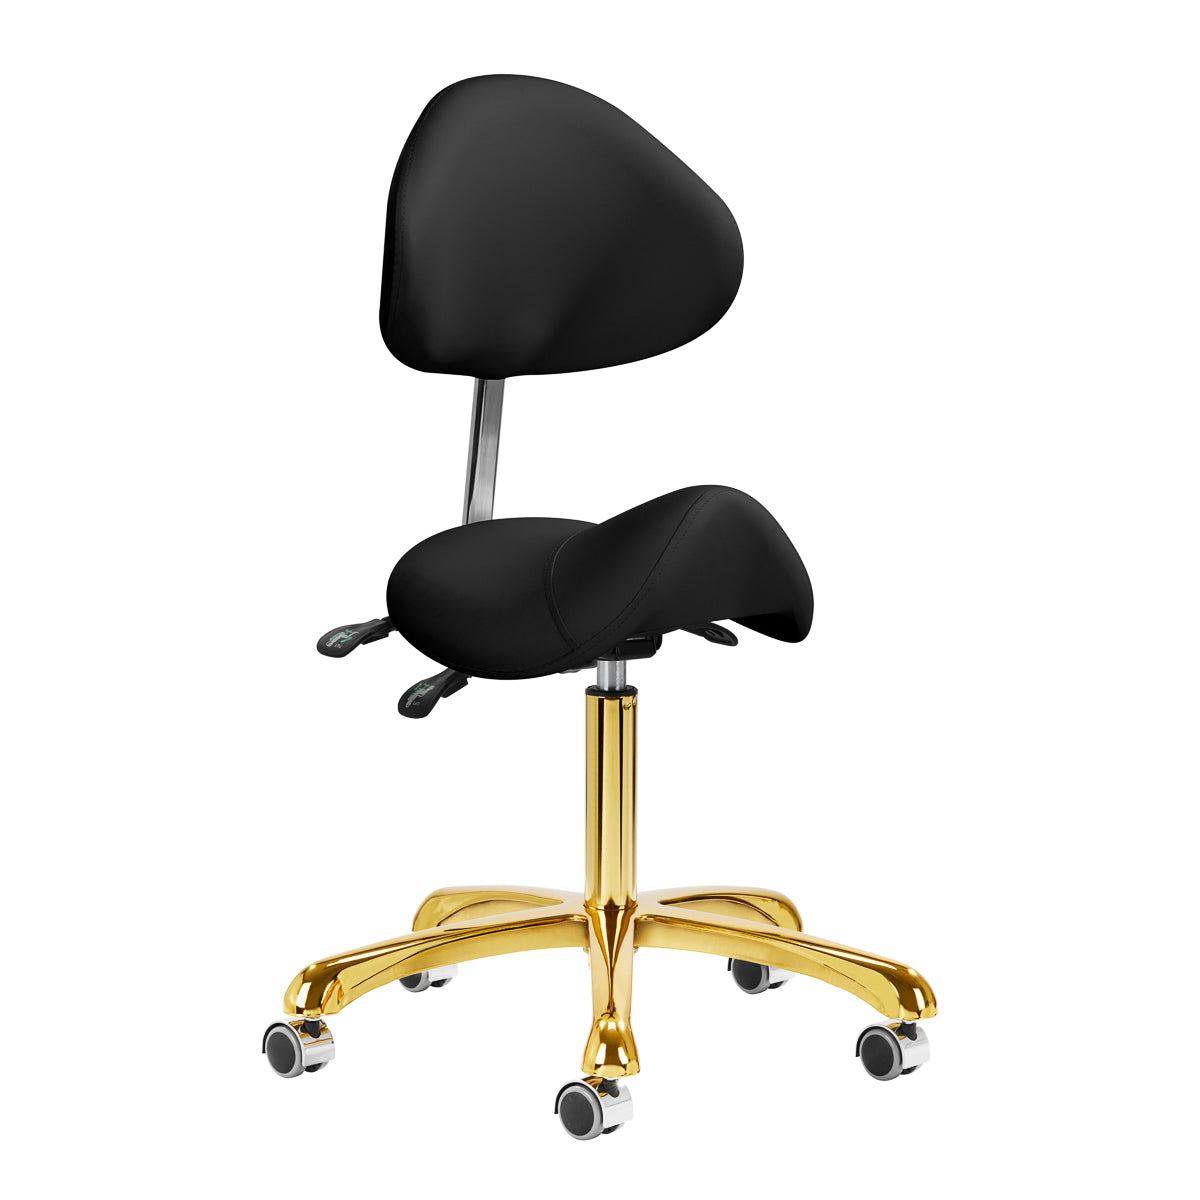 Cosmetic stool 1004 gold Giovanni black 